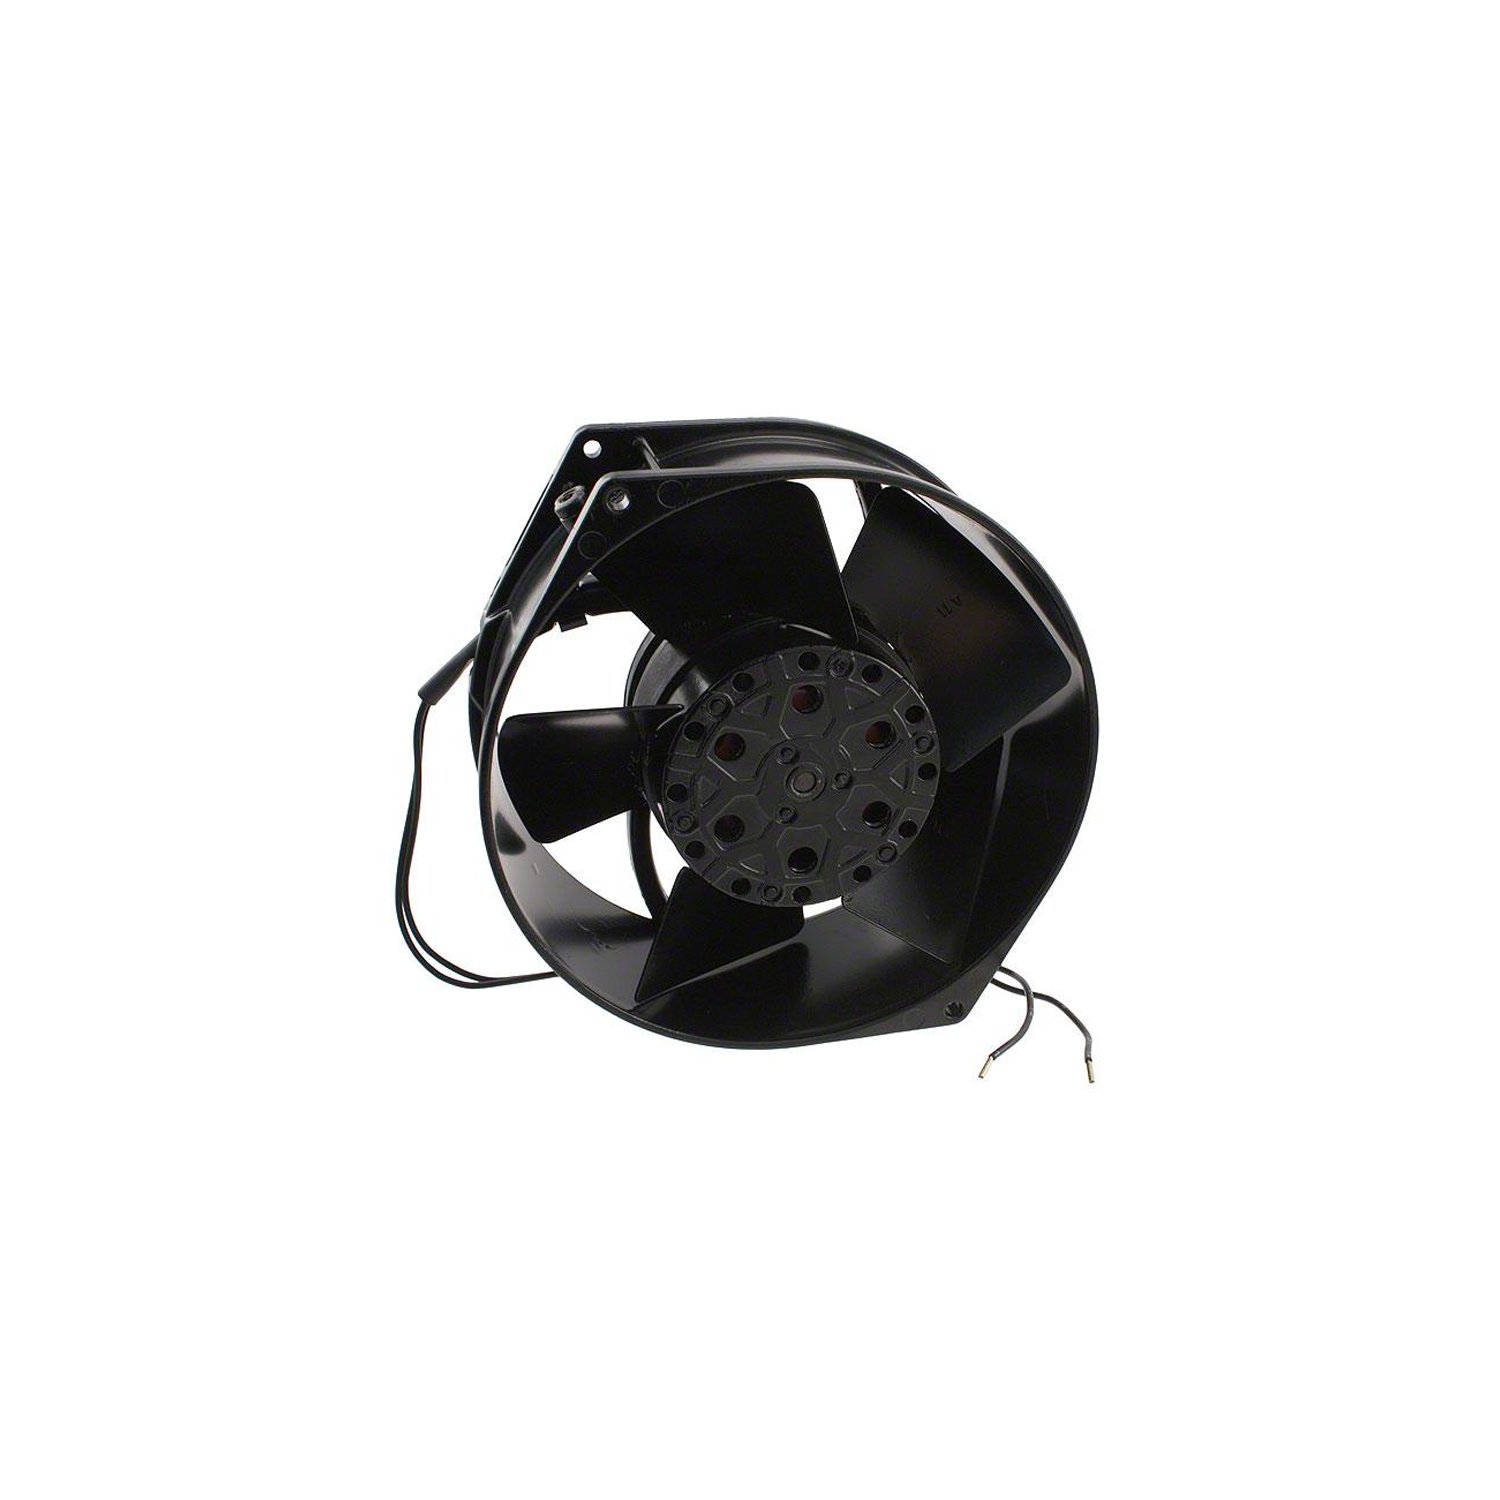 Axial fan EBM W2S130-BM03-01, d = 150x55mm, 230V, for pipes